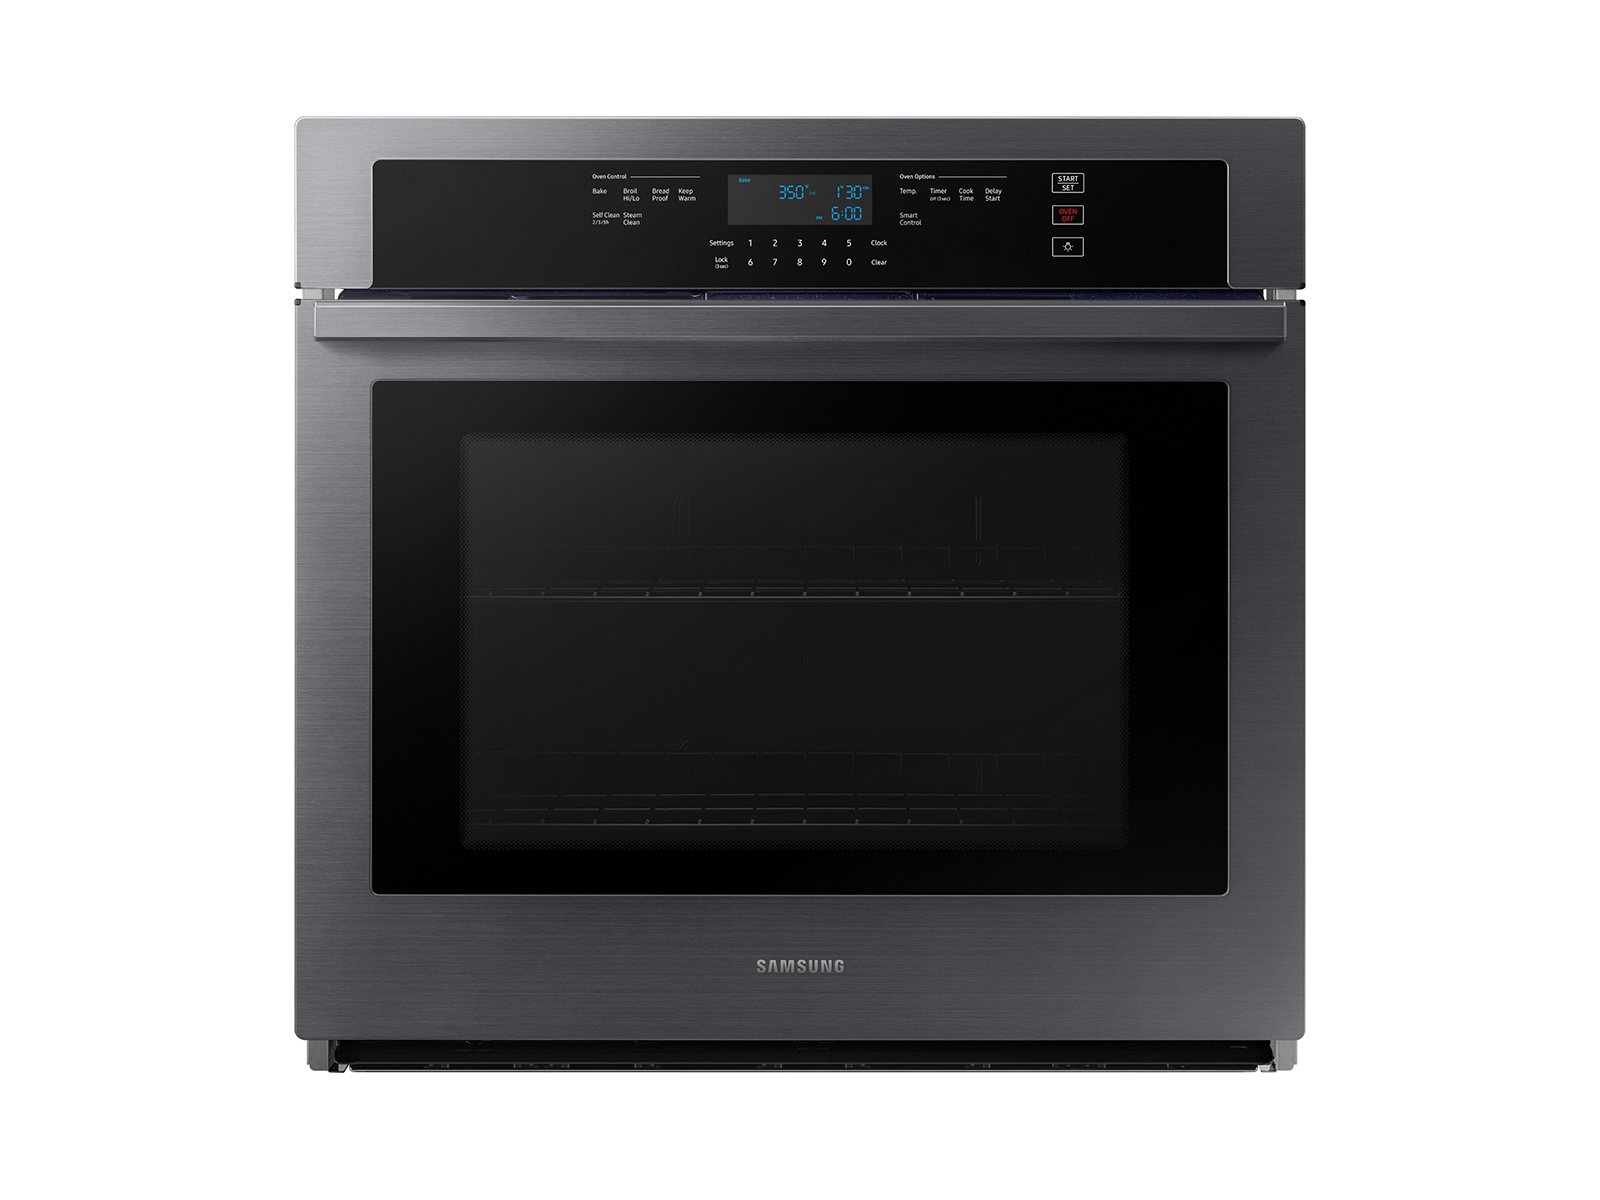 Samsung 30" Smart Single Wall Oven in Black Stainless Steel(NV51T5511SG/AA)